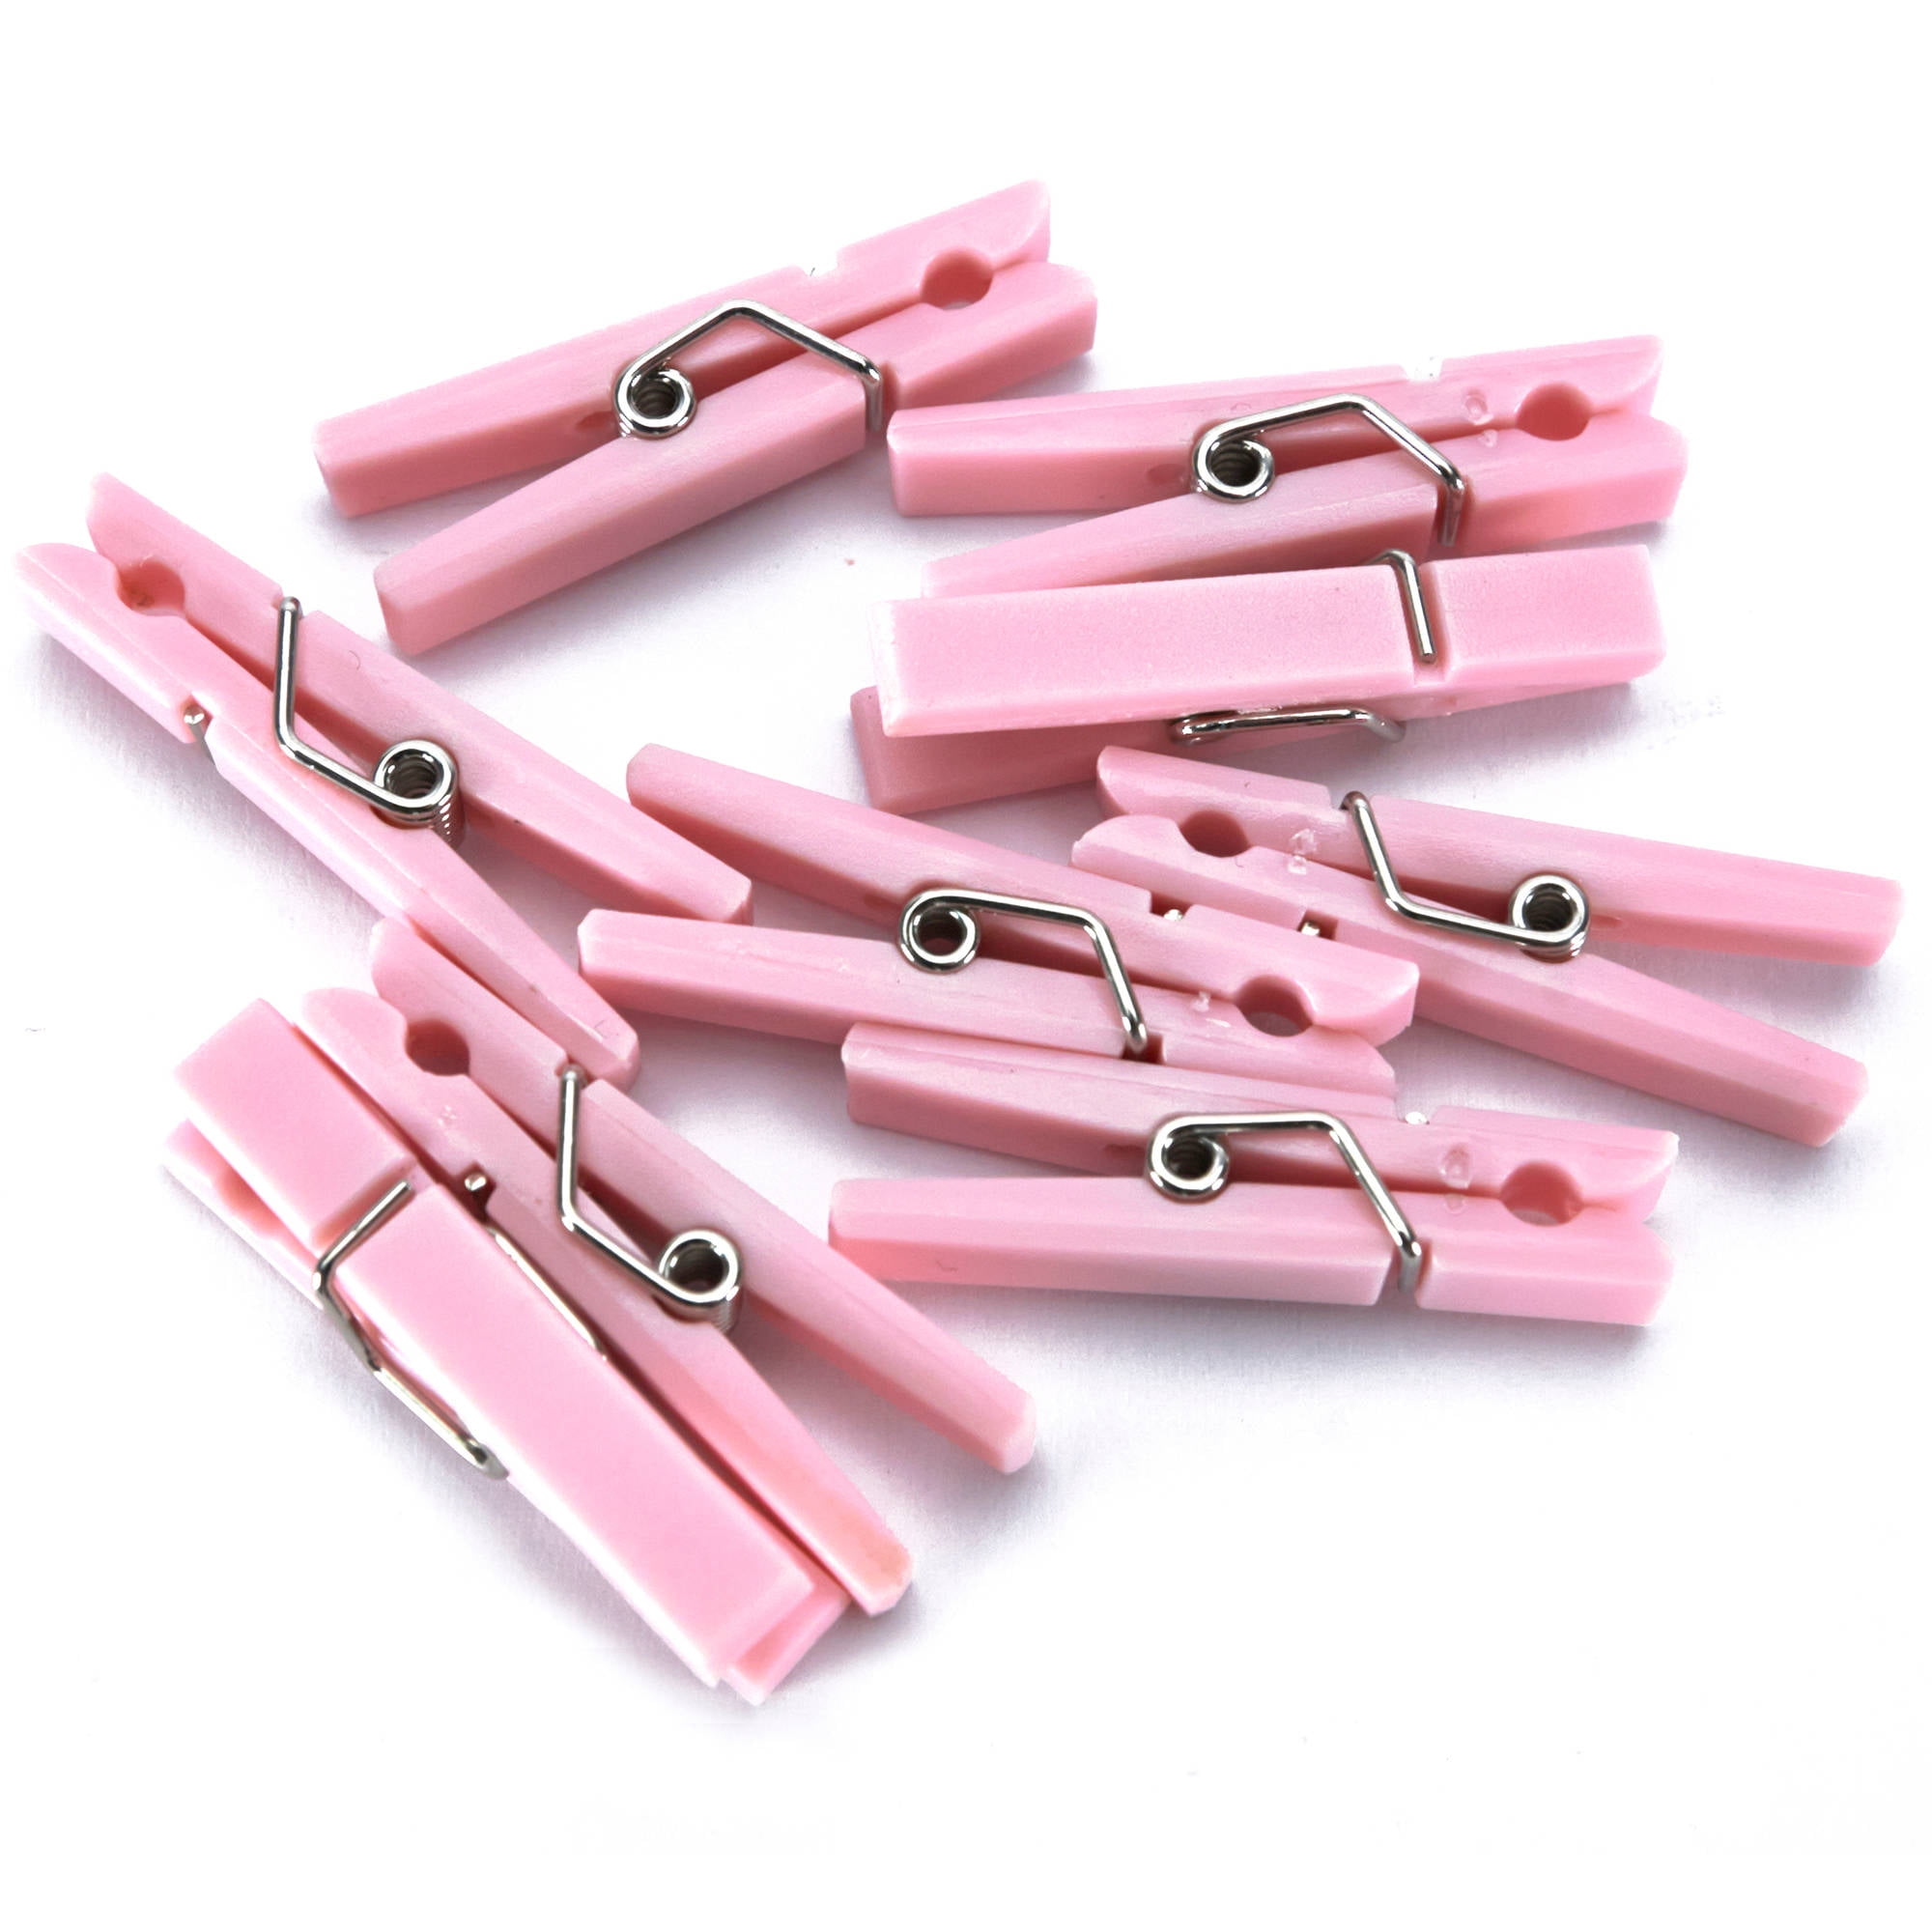 Sooneat Clothes Pins Mini Clothespins Pink - 100 Pcs Wooden Small Clothespins for Pictures with Jute Twine Tiny Photo Paper Clip, Ideal for Baby Shower